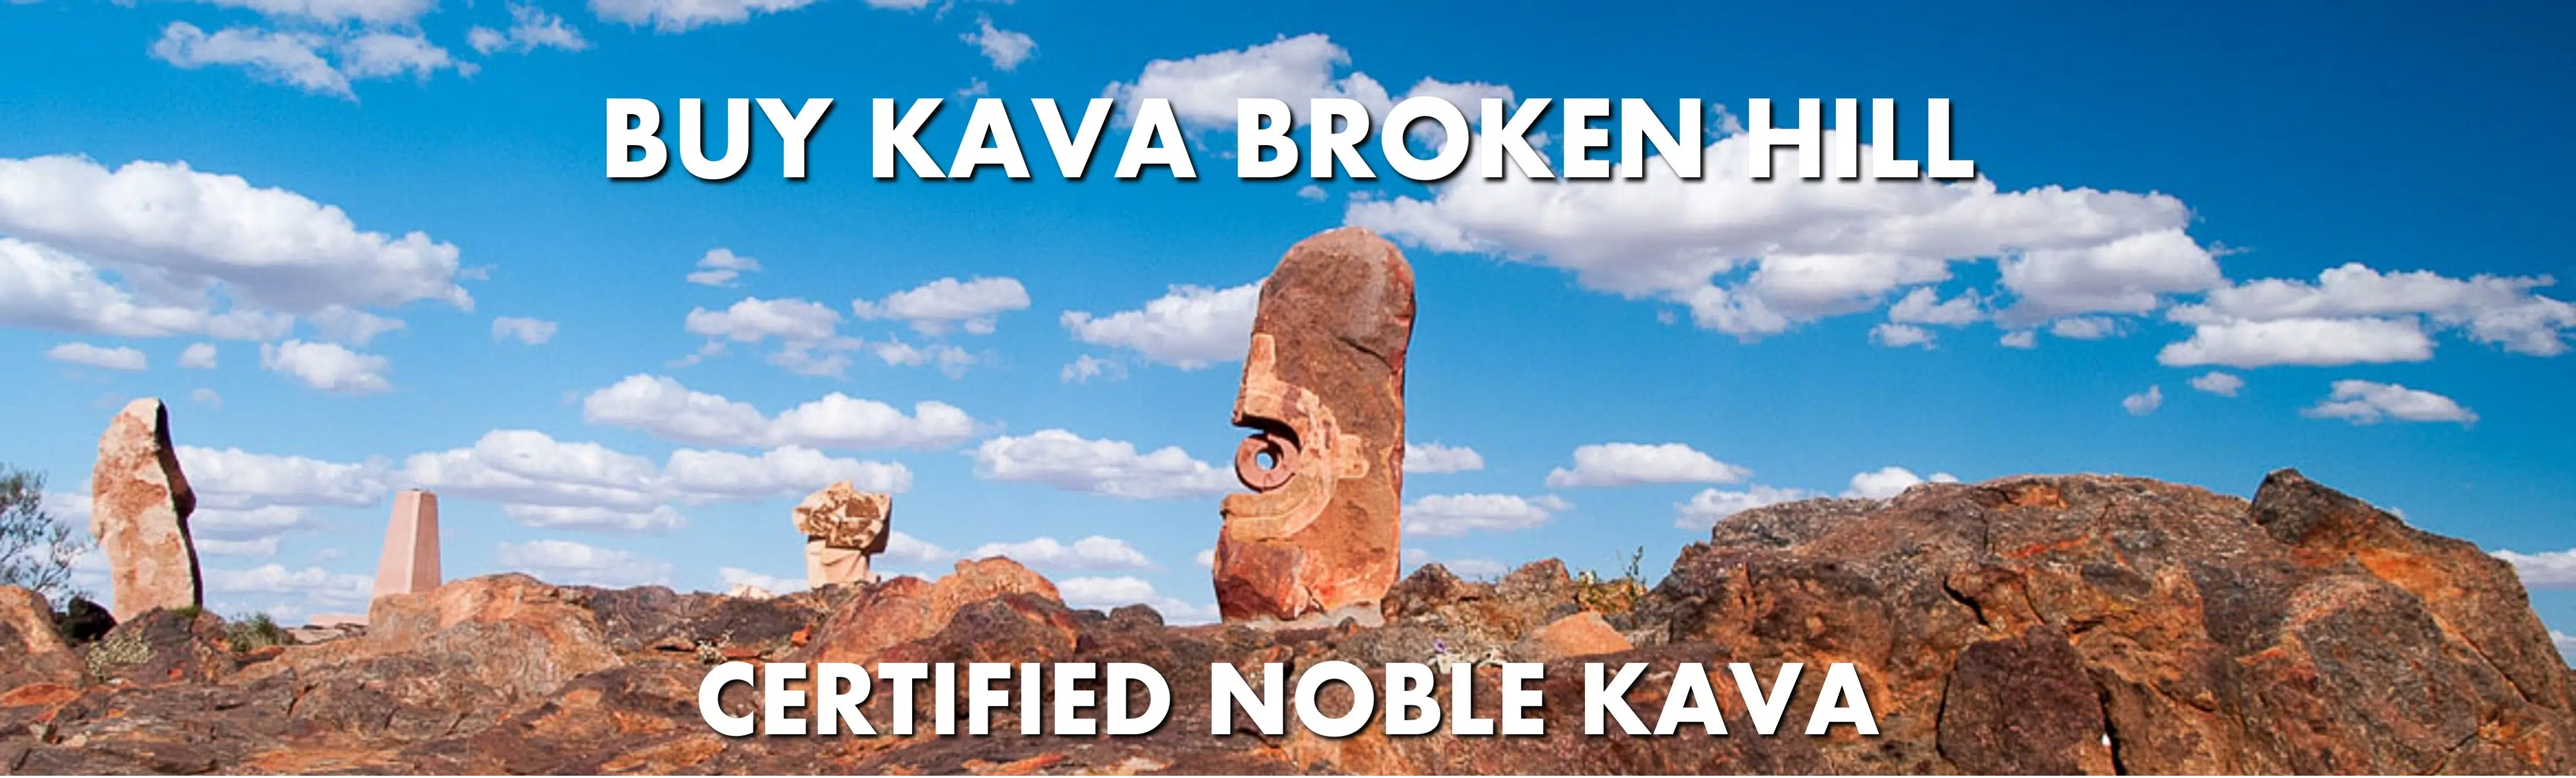 Statues near Broken Hill New South Wales with caption Buy Kava Broken Hill Certified Noble Kava